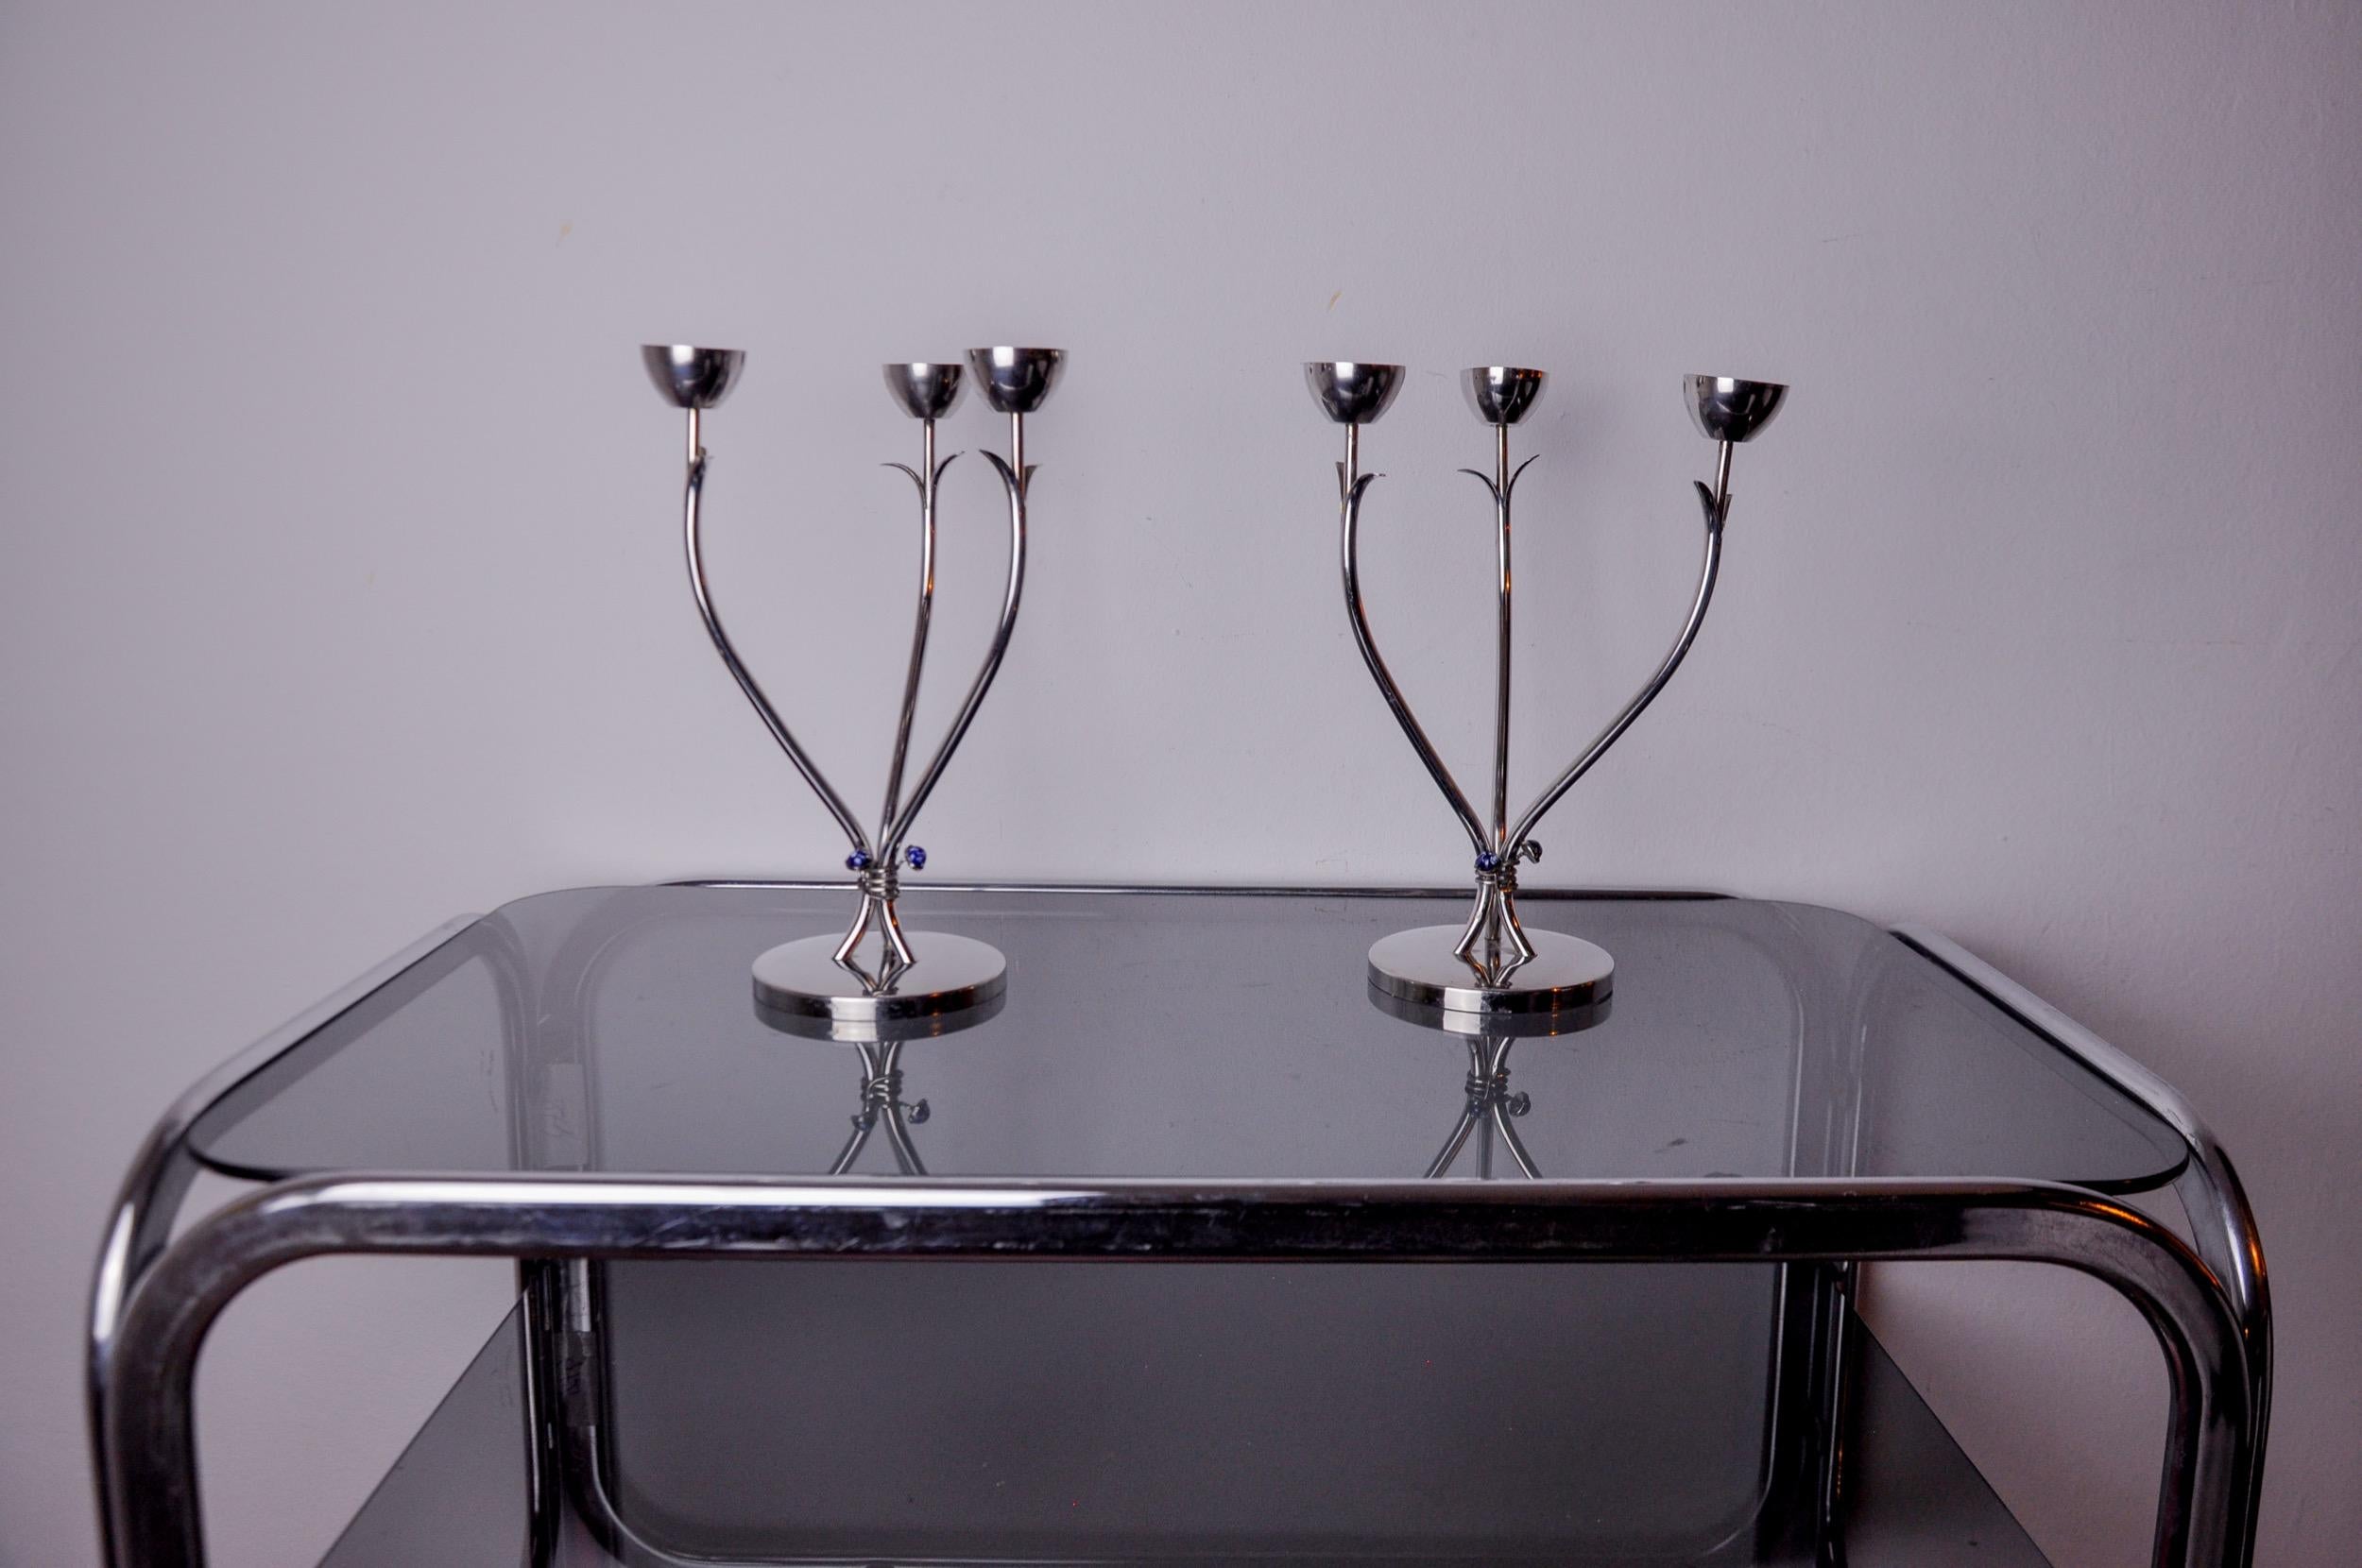 Pair of art deco stainless steel candlesticks with 3 flames and blue For Sale 2